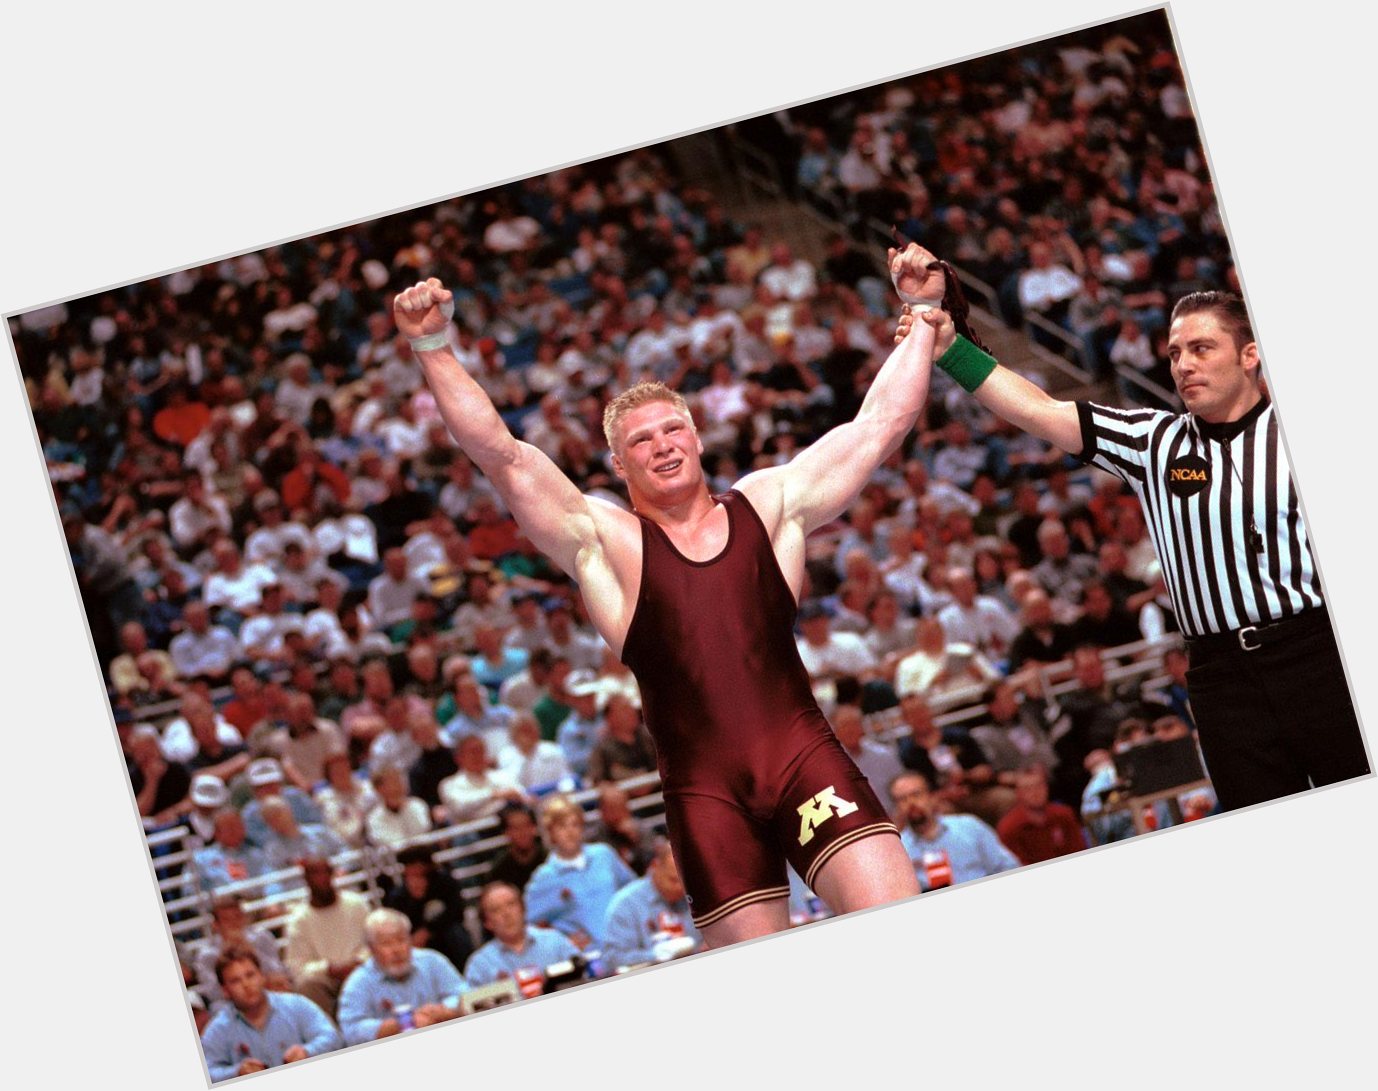 Happy Birthday to a once in a generation athlete, Brock Lesnar! 